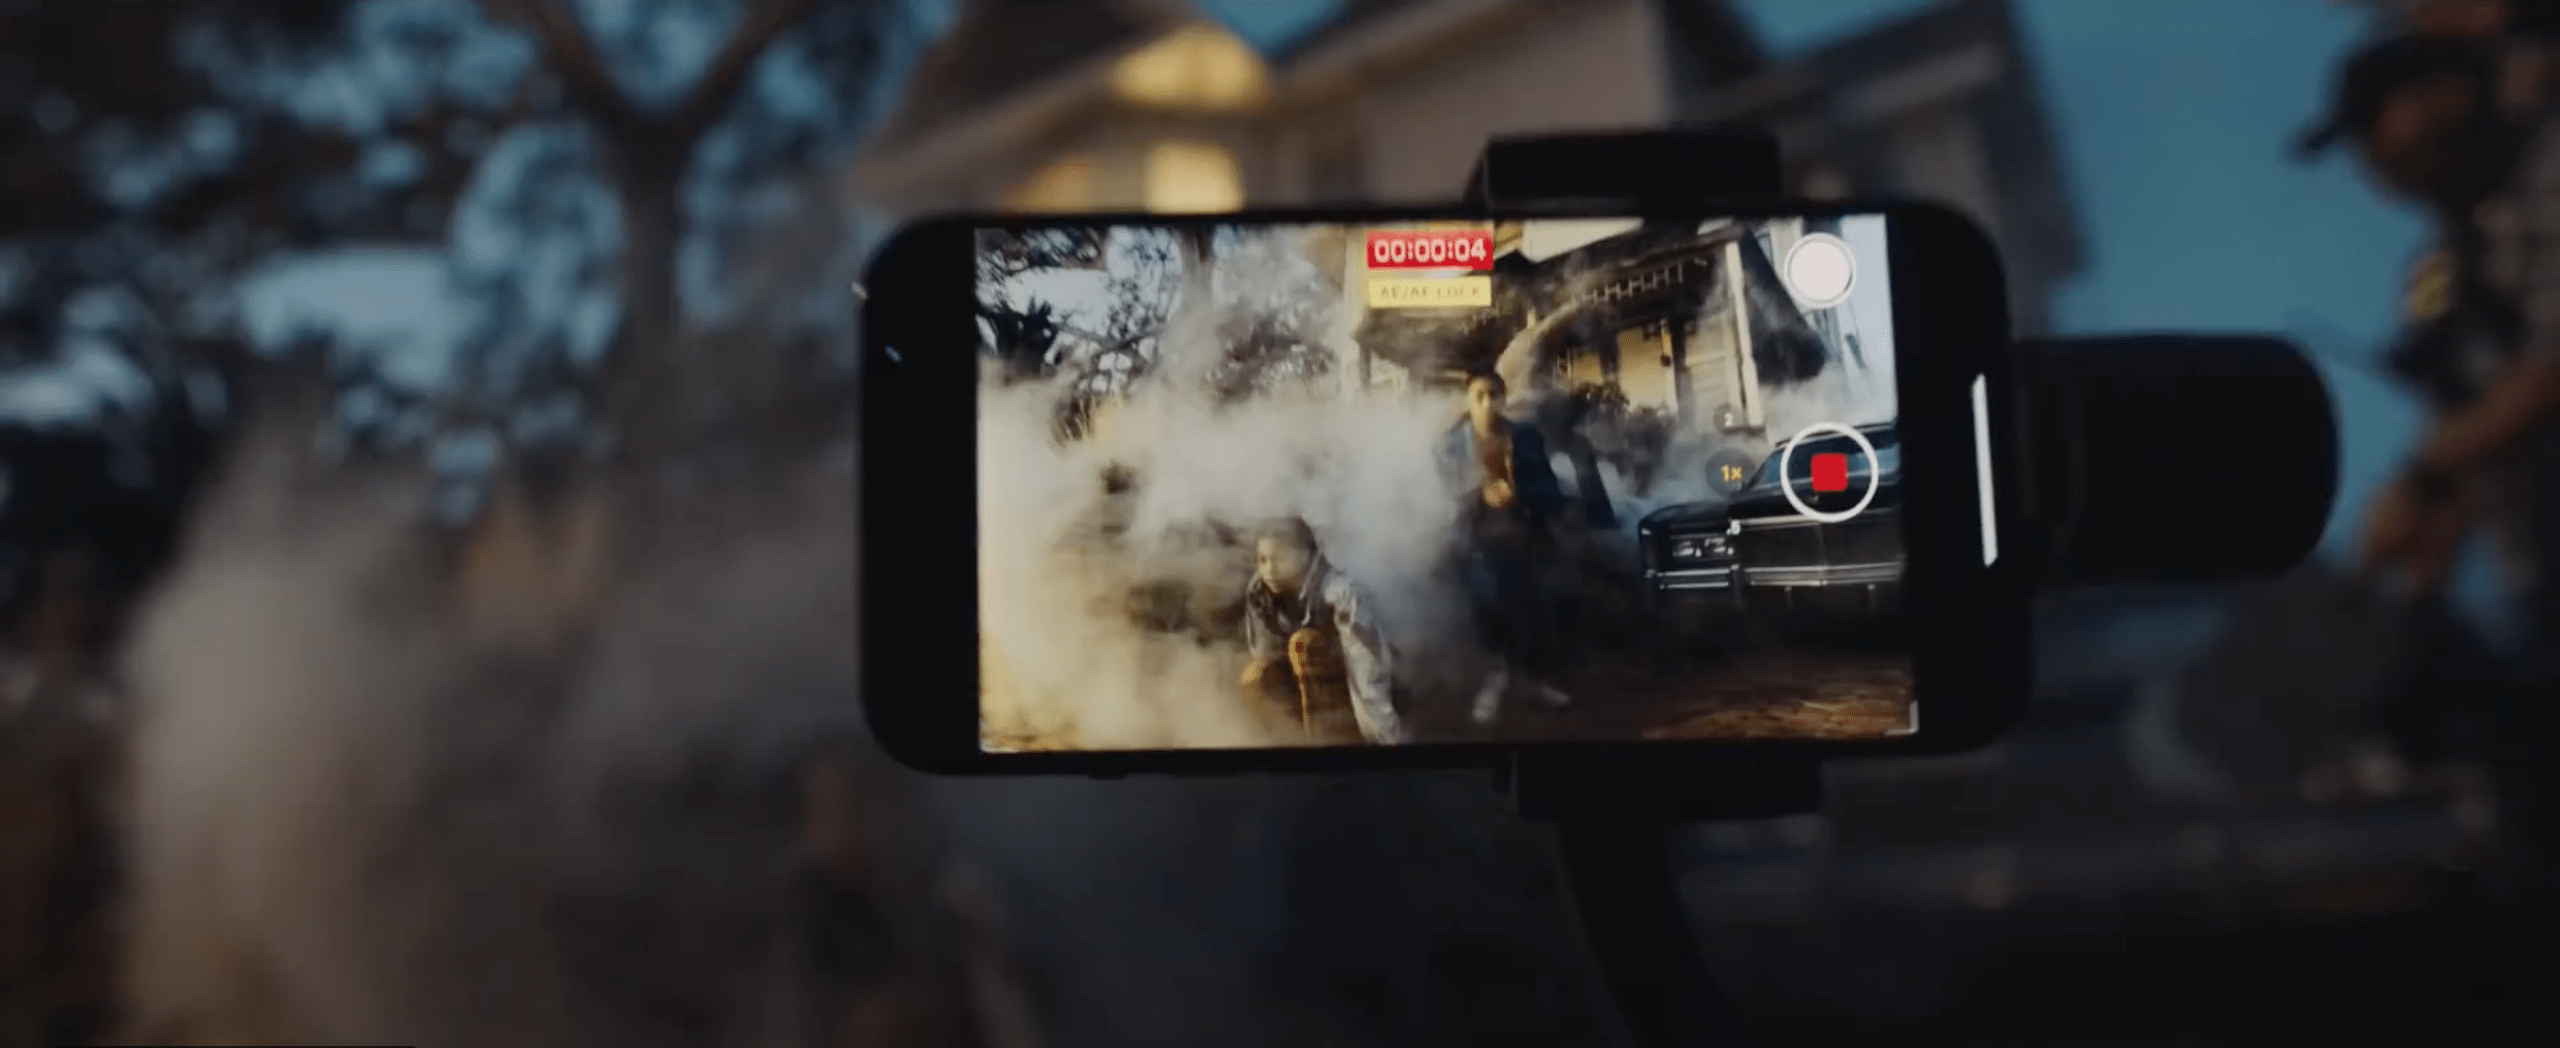 Record, Edit, & Play Cinematic Movies with Dolby Vision on iPhone 12